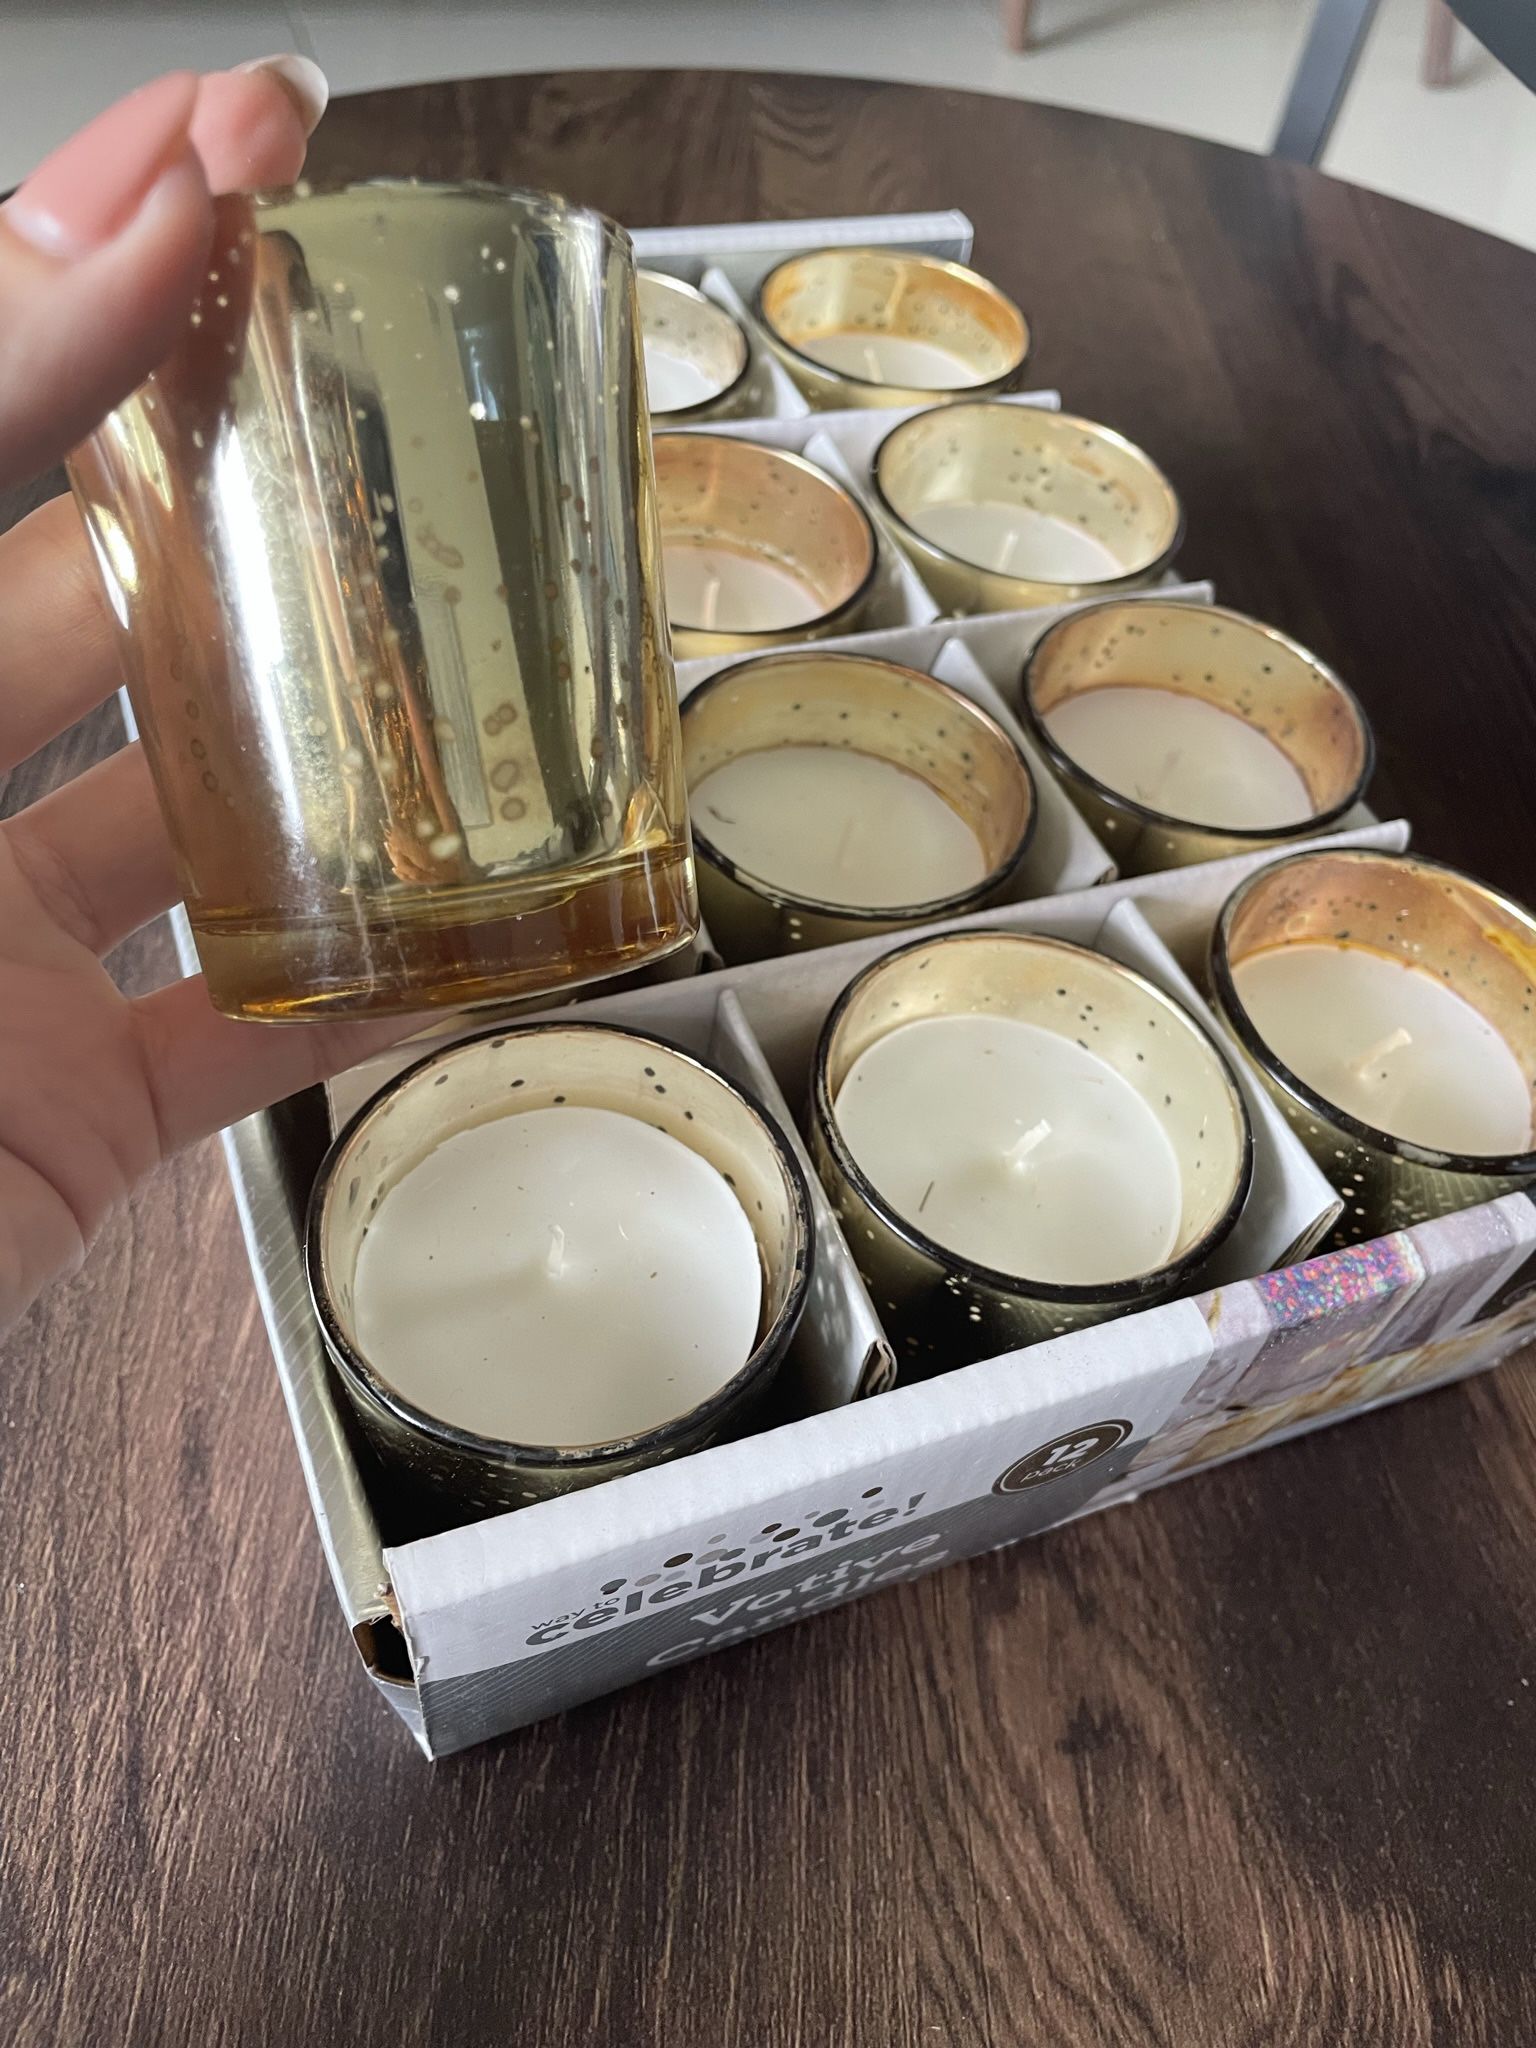 BRAND NEW GOLD VOTIVE CANDLES